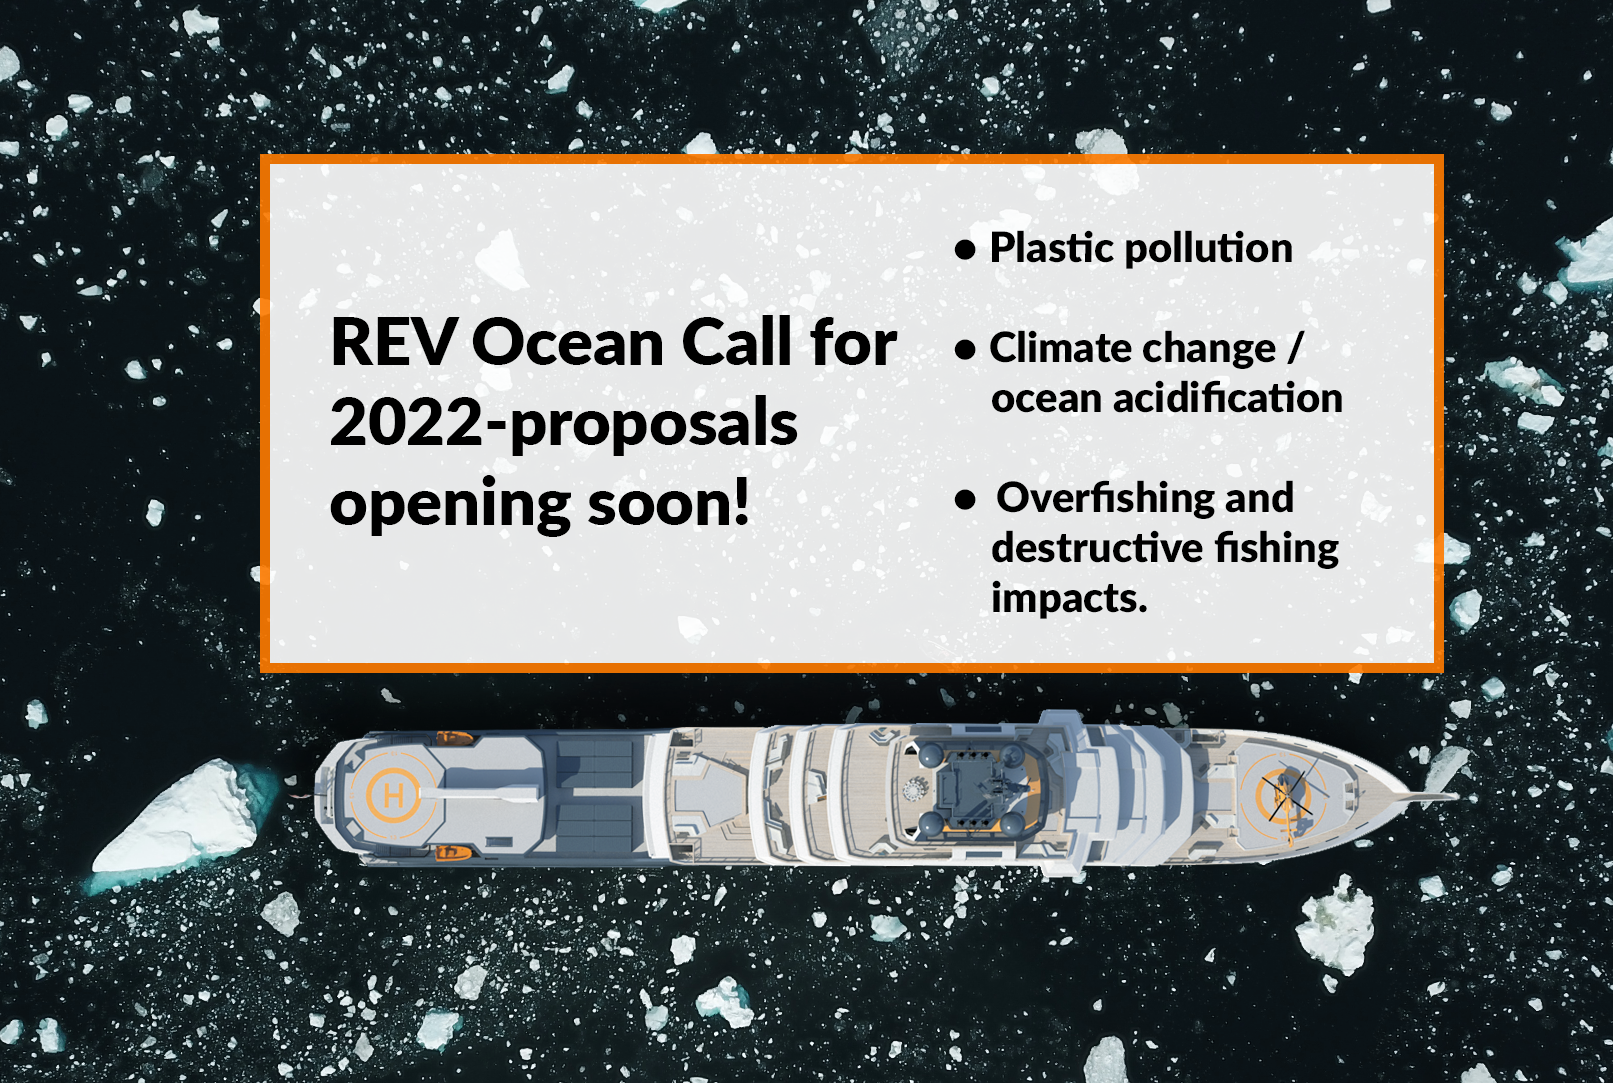 REV Ocean Call for 2022-proposals opening soon!